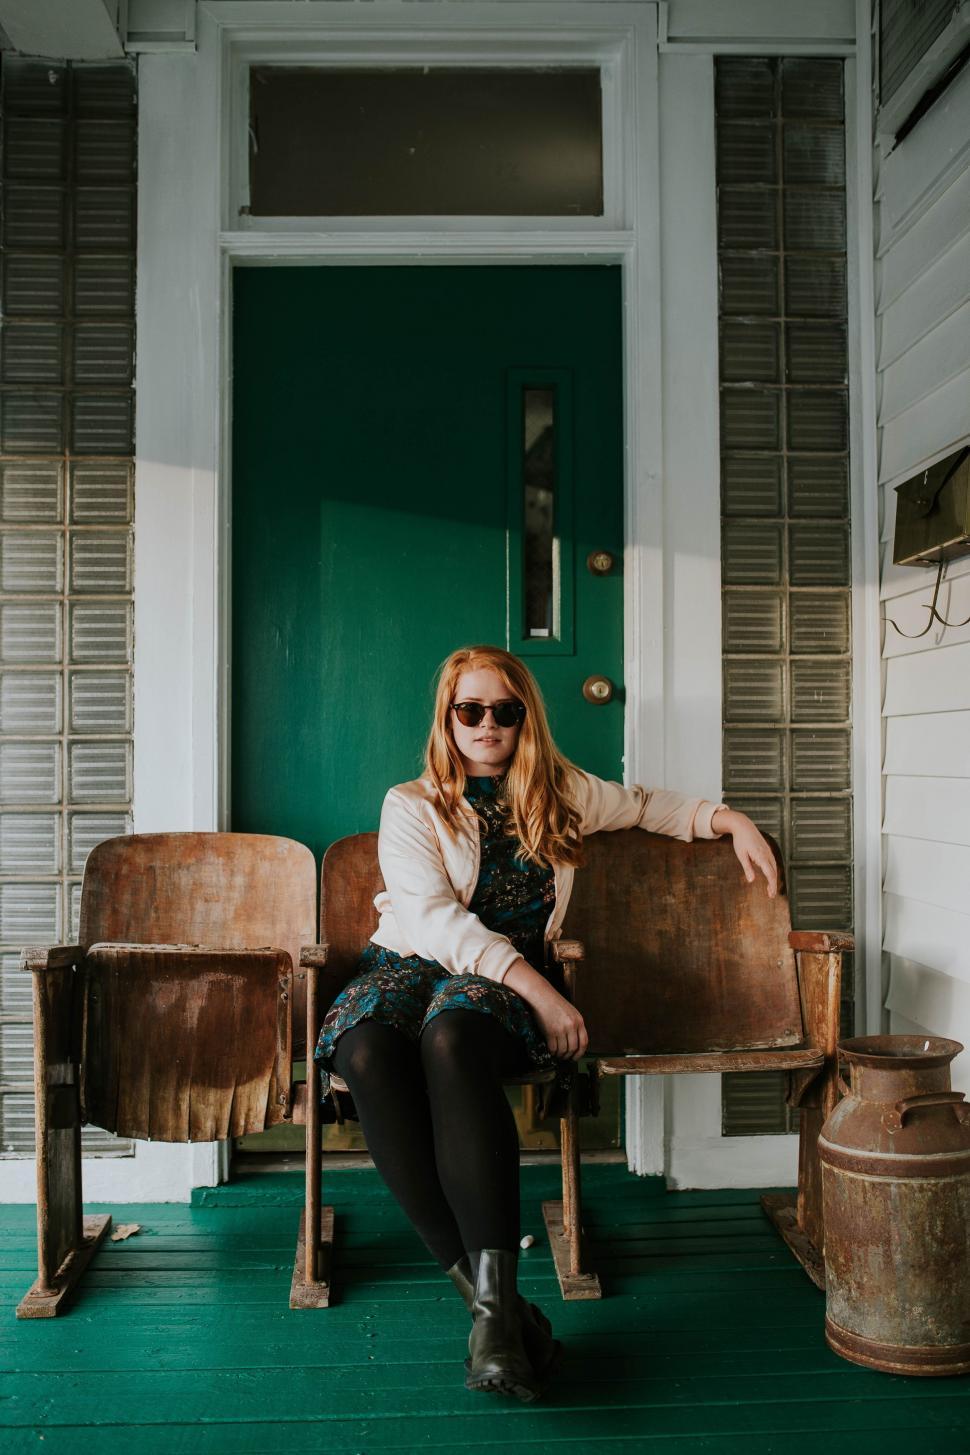 Free Image of Woman Sitting on Chair in Front of Green Door 